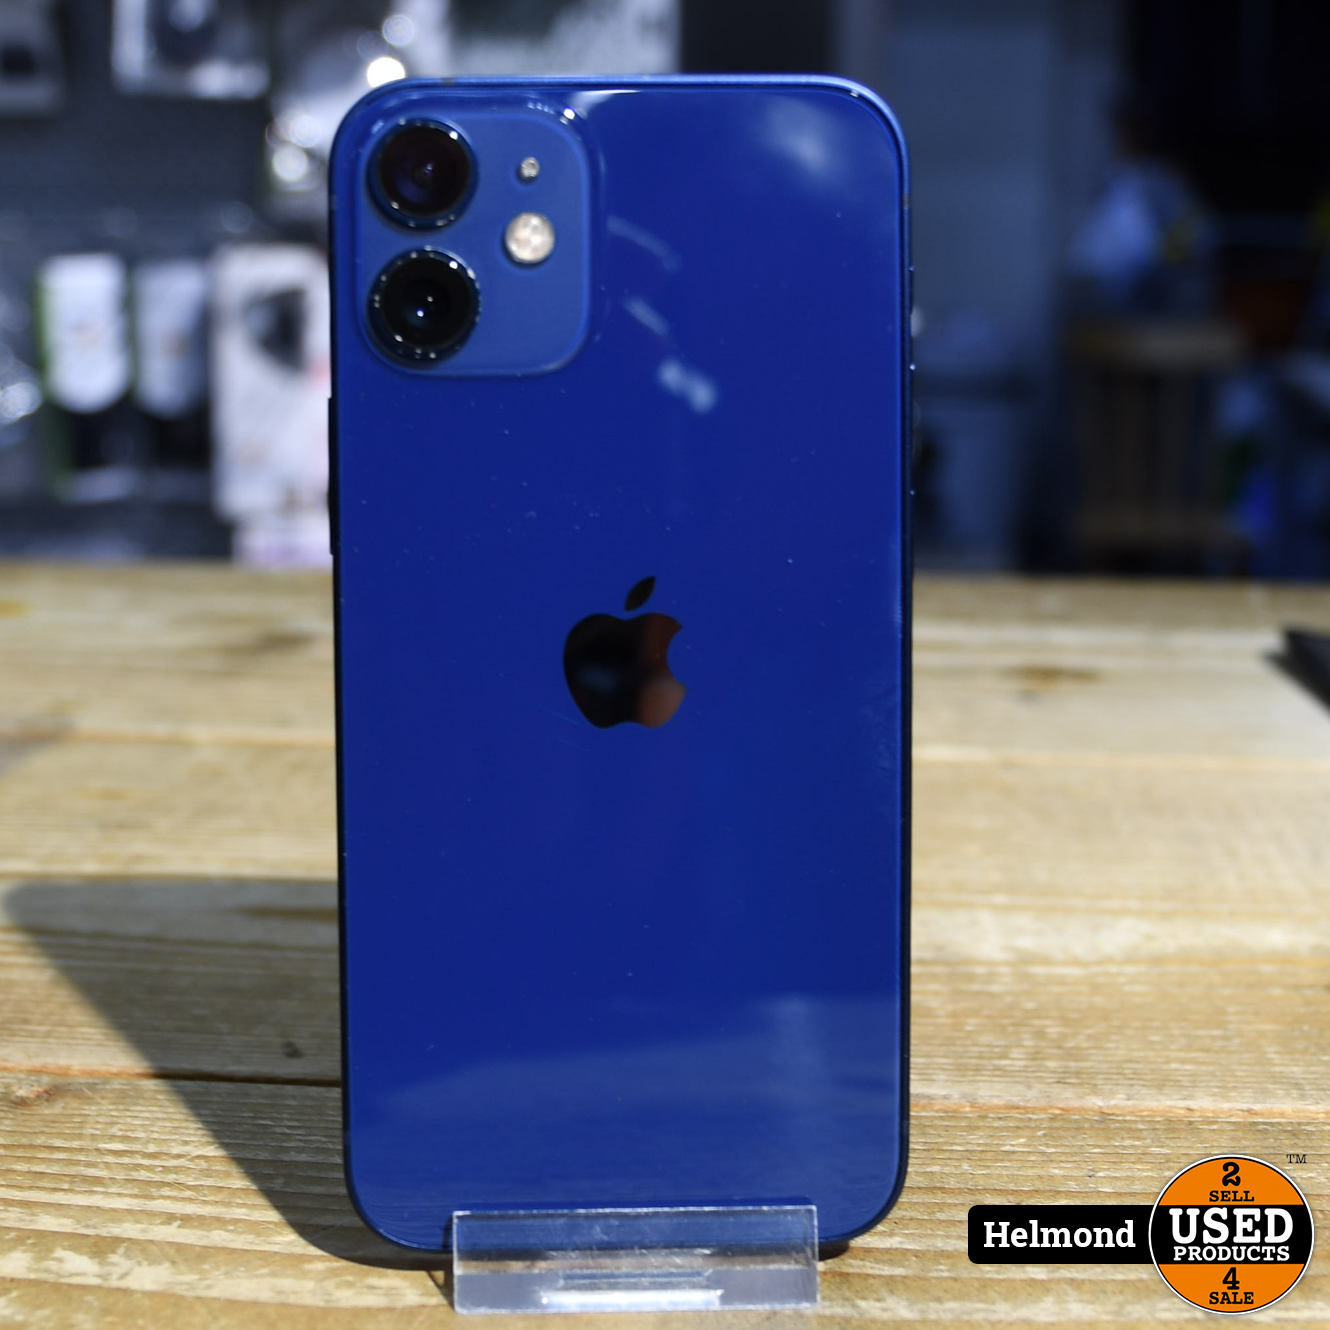 iPhone 12 Mini 128Gb Blauw | Nette Staat - Used Products Helmond